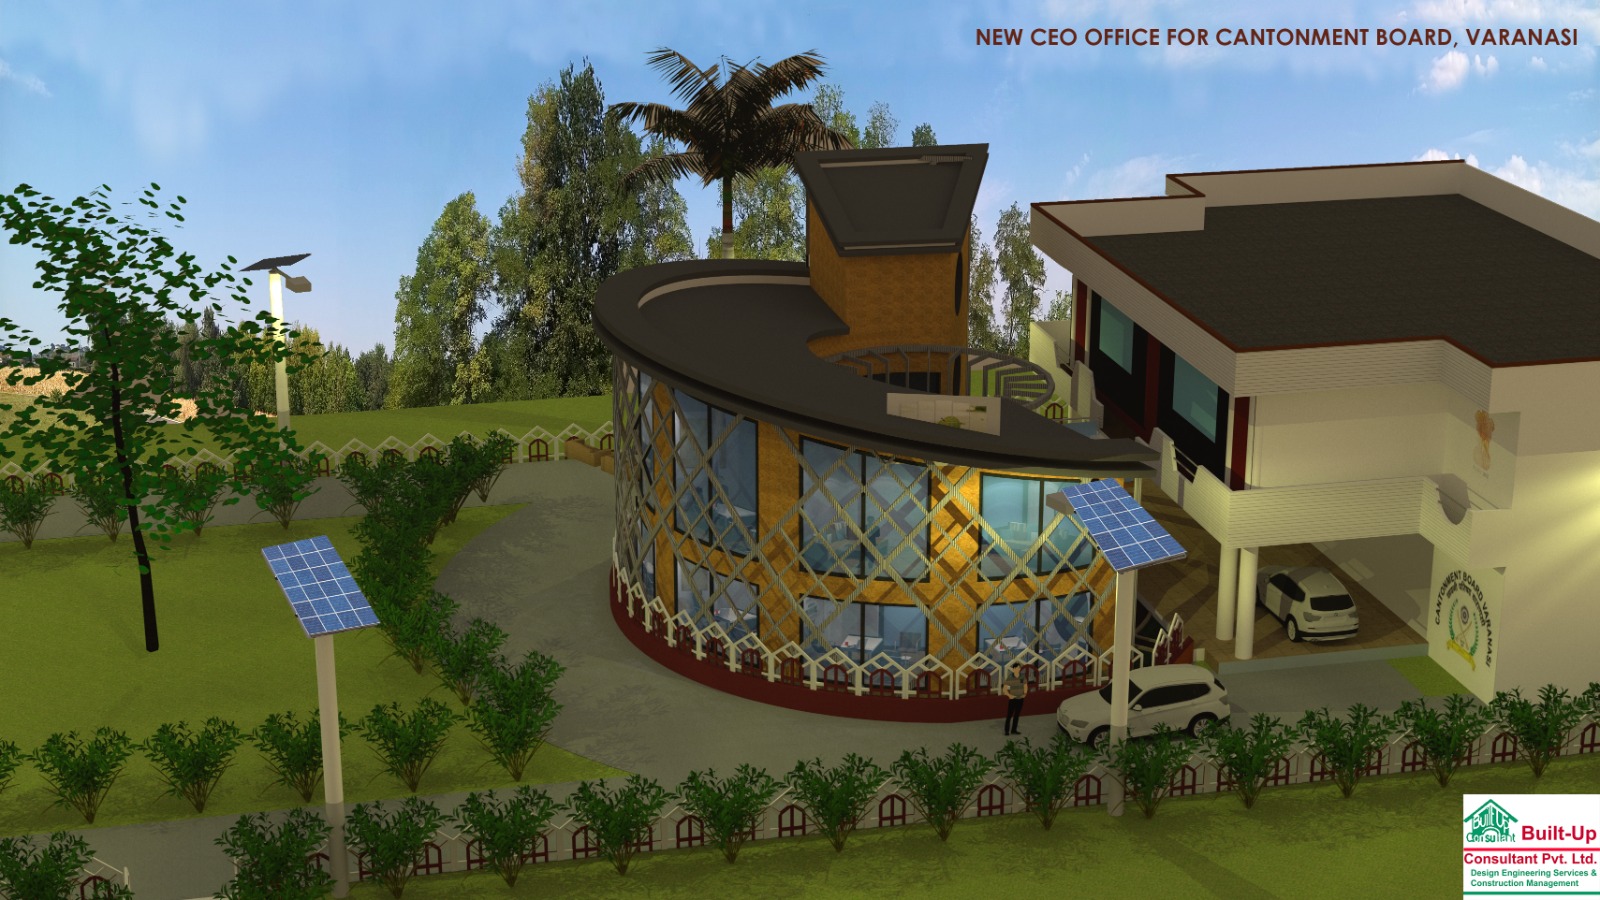 Planning, Design Engineering  Consultancy of New CEO Office for Cantonment Board, Varanasi.